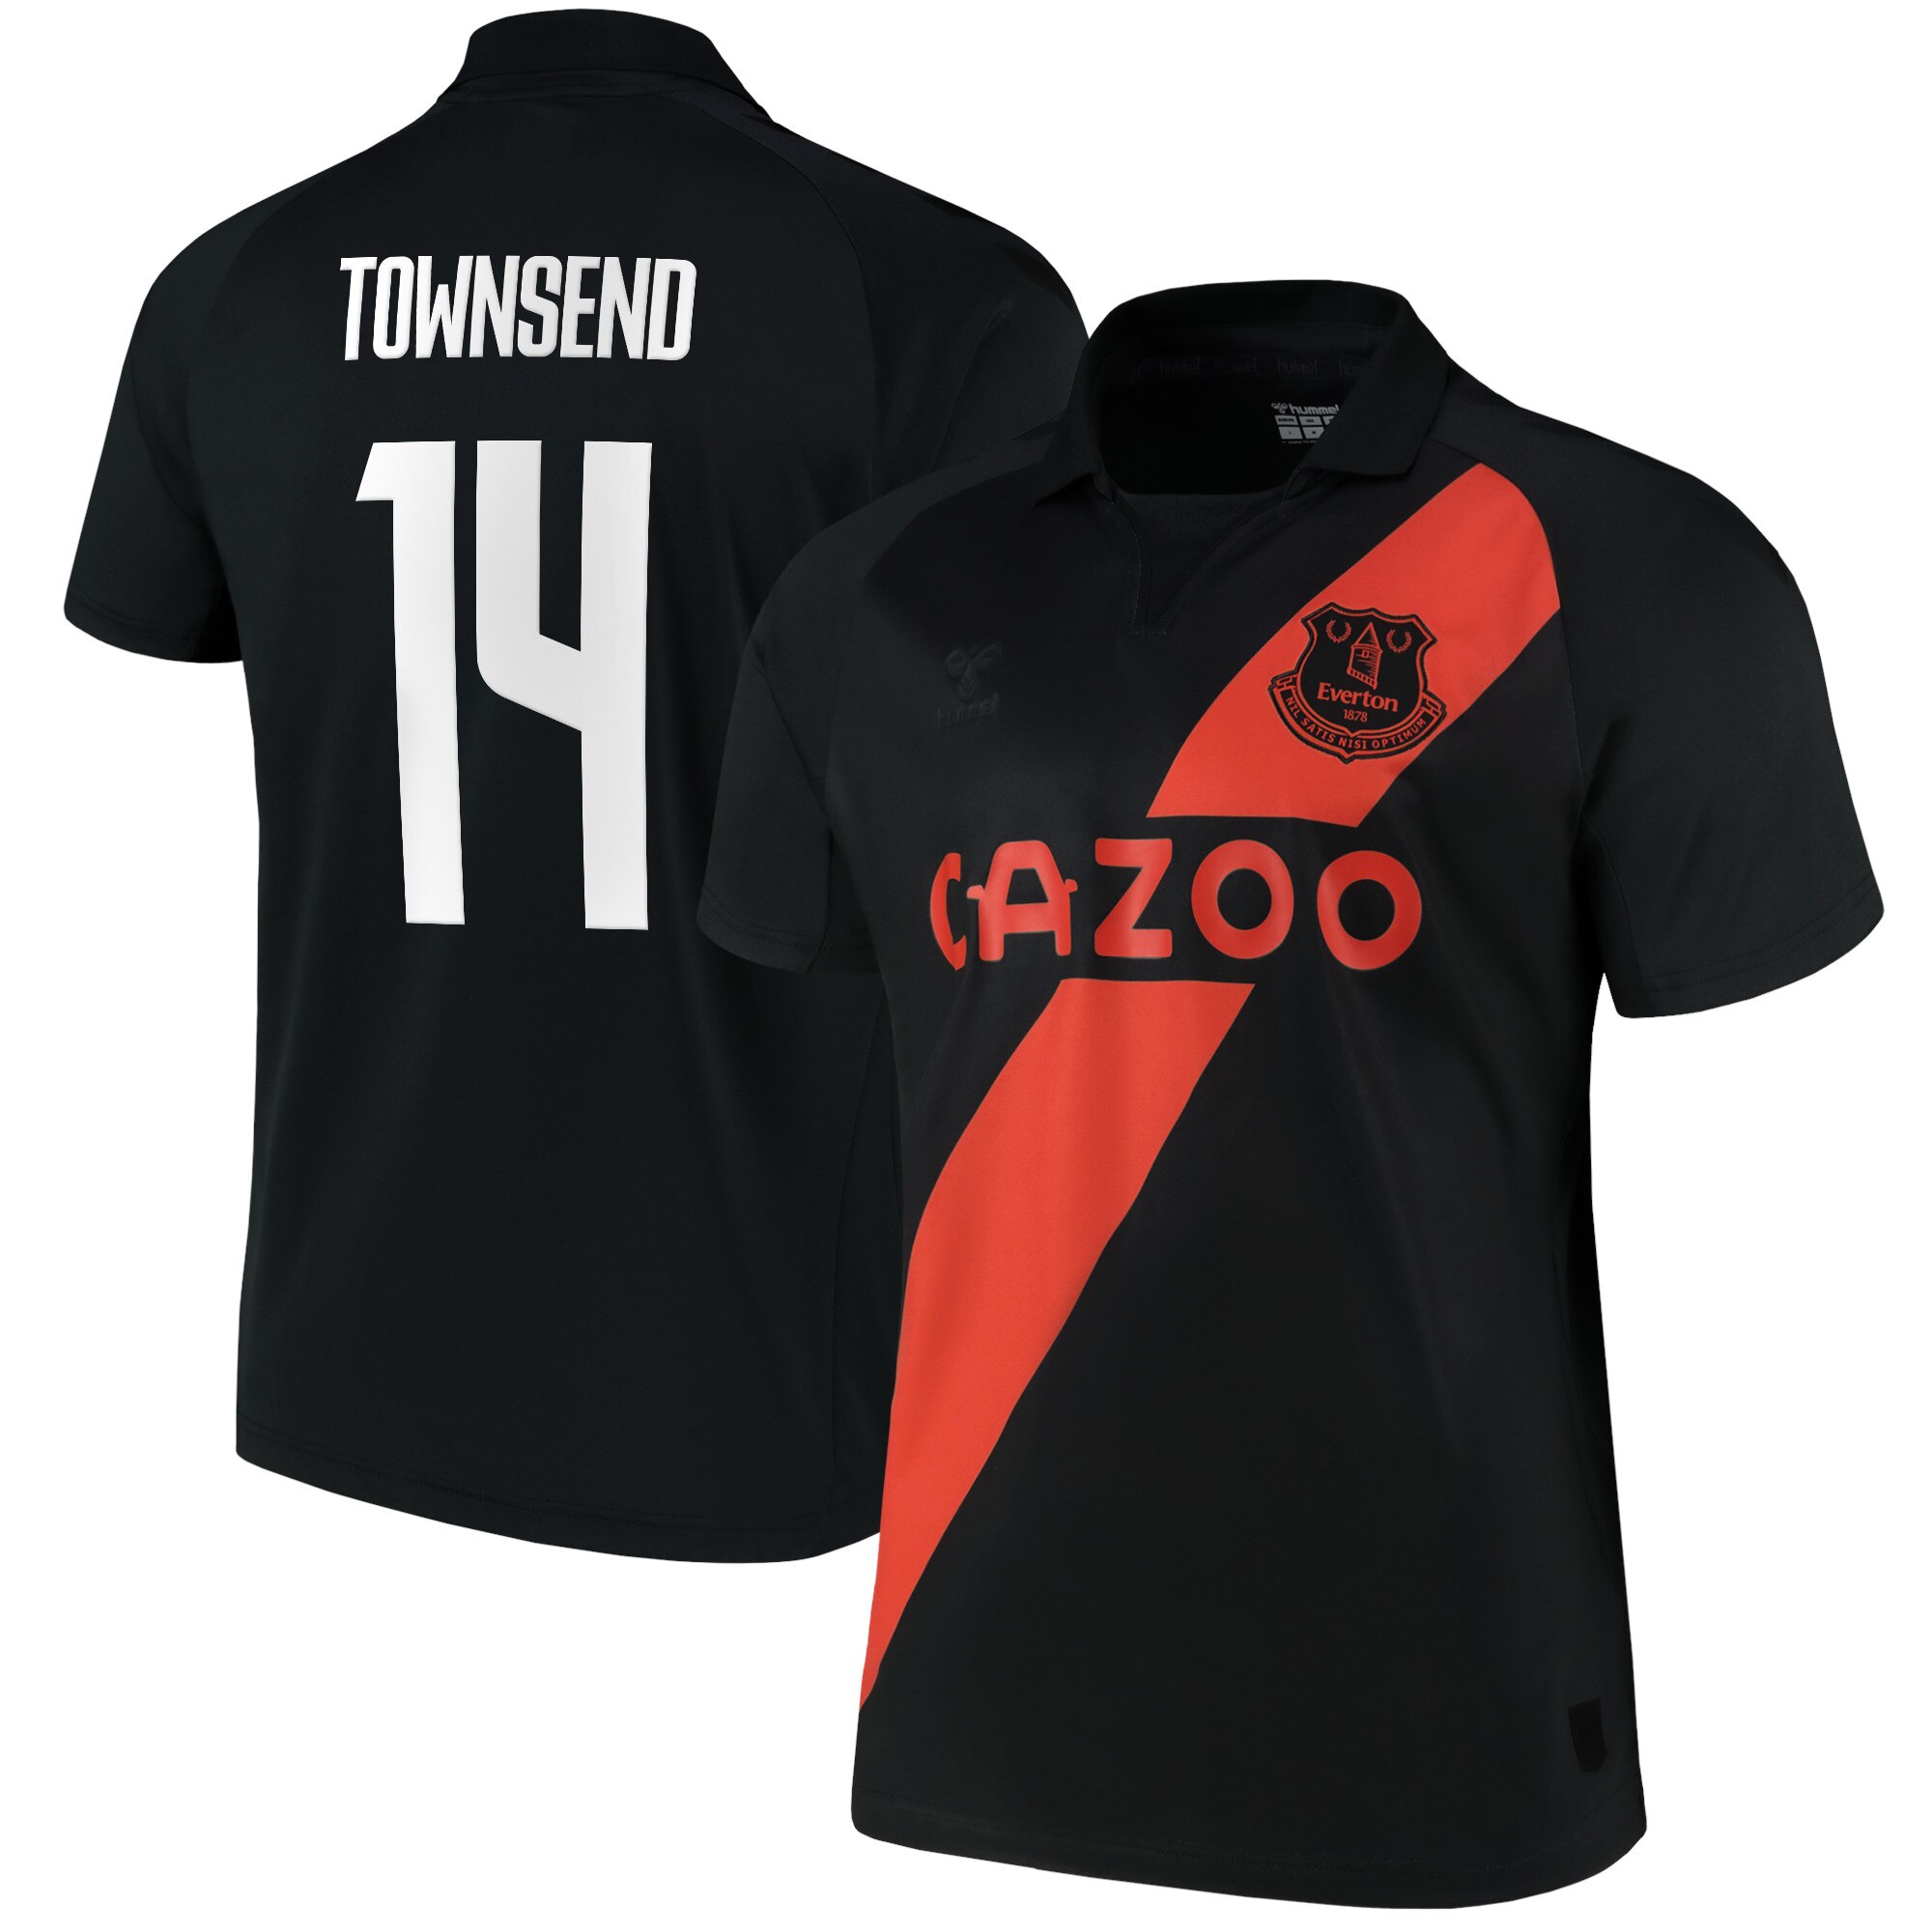 Everton Cup Away Shirt 2021-22 with Townsend 14 printing